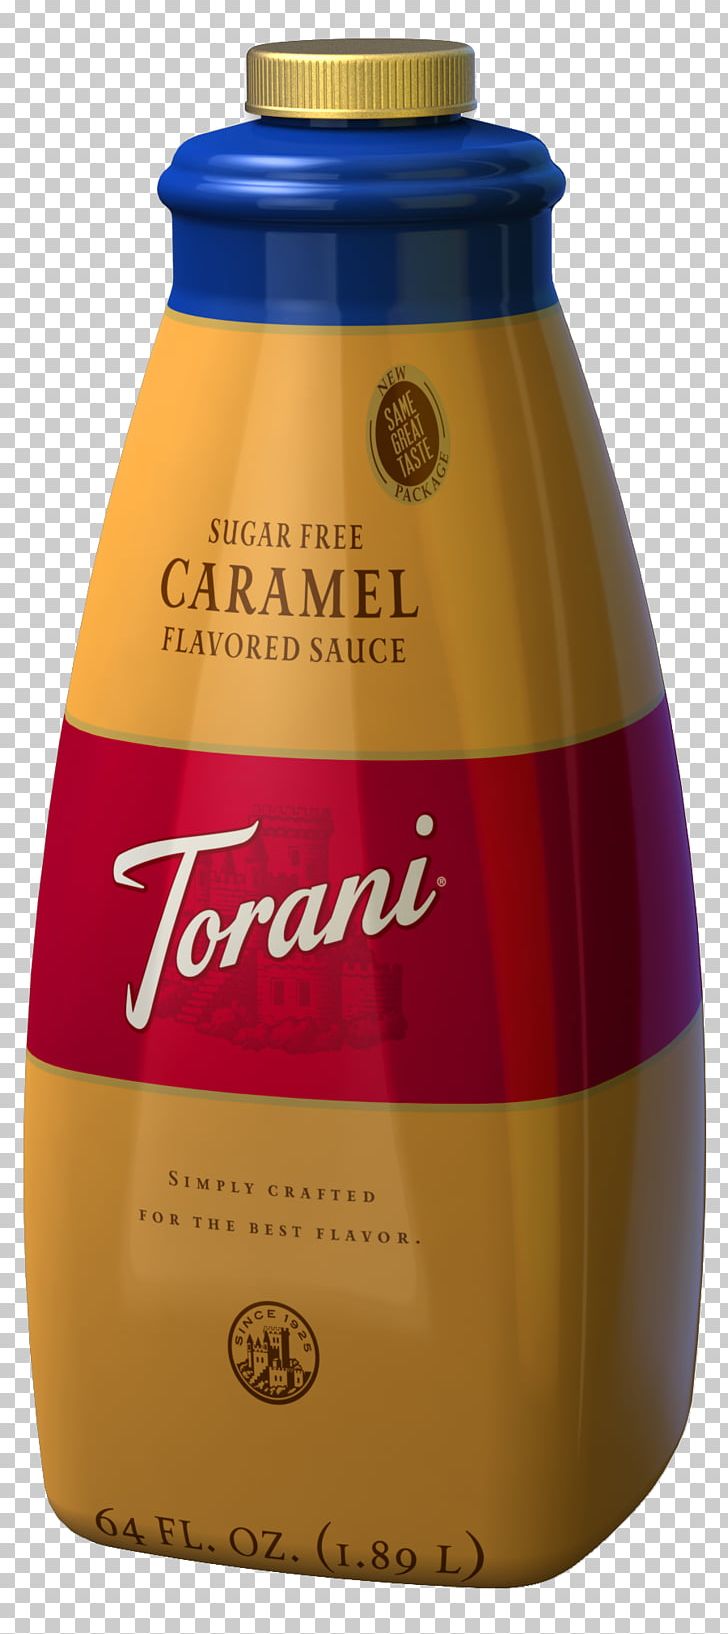 R. Torre & Company PNG, Clipart, Caramel, Chocolate, Chocolate Bar, Chocolate Syrup, Coffee Free PNG Download